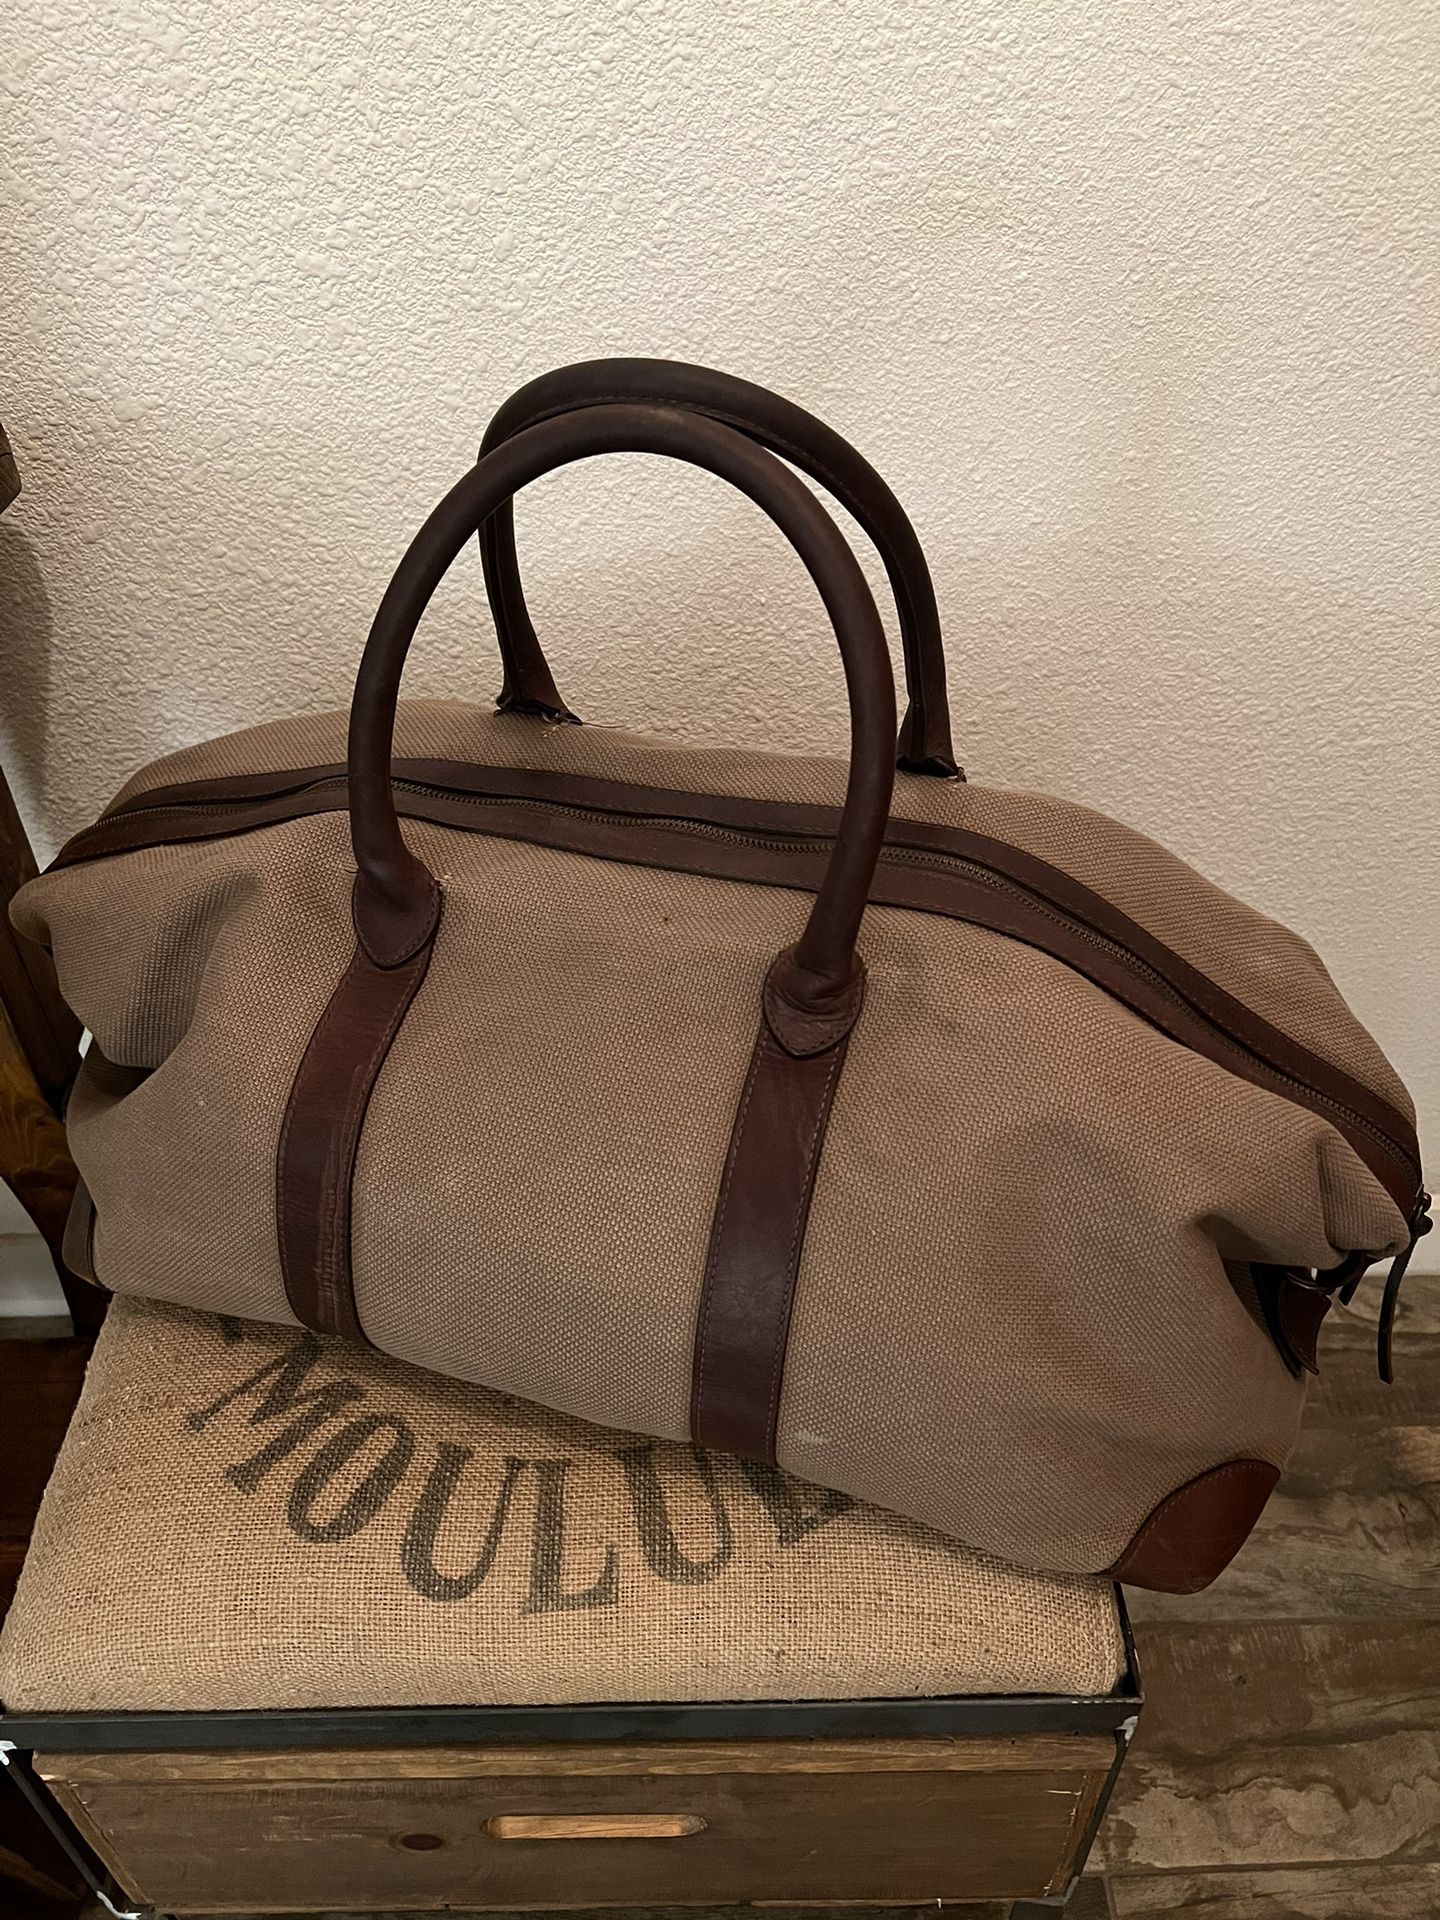 Gently Used Heavy Soft And Sturdy Canvas And Brown Leather Handles And Trim With 5 Rubber Feet On Bottom Of Bag